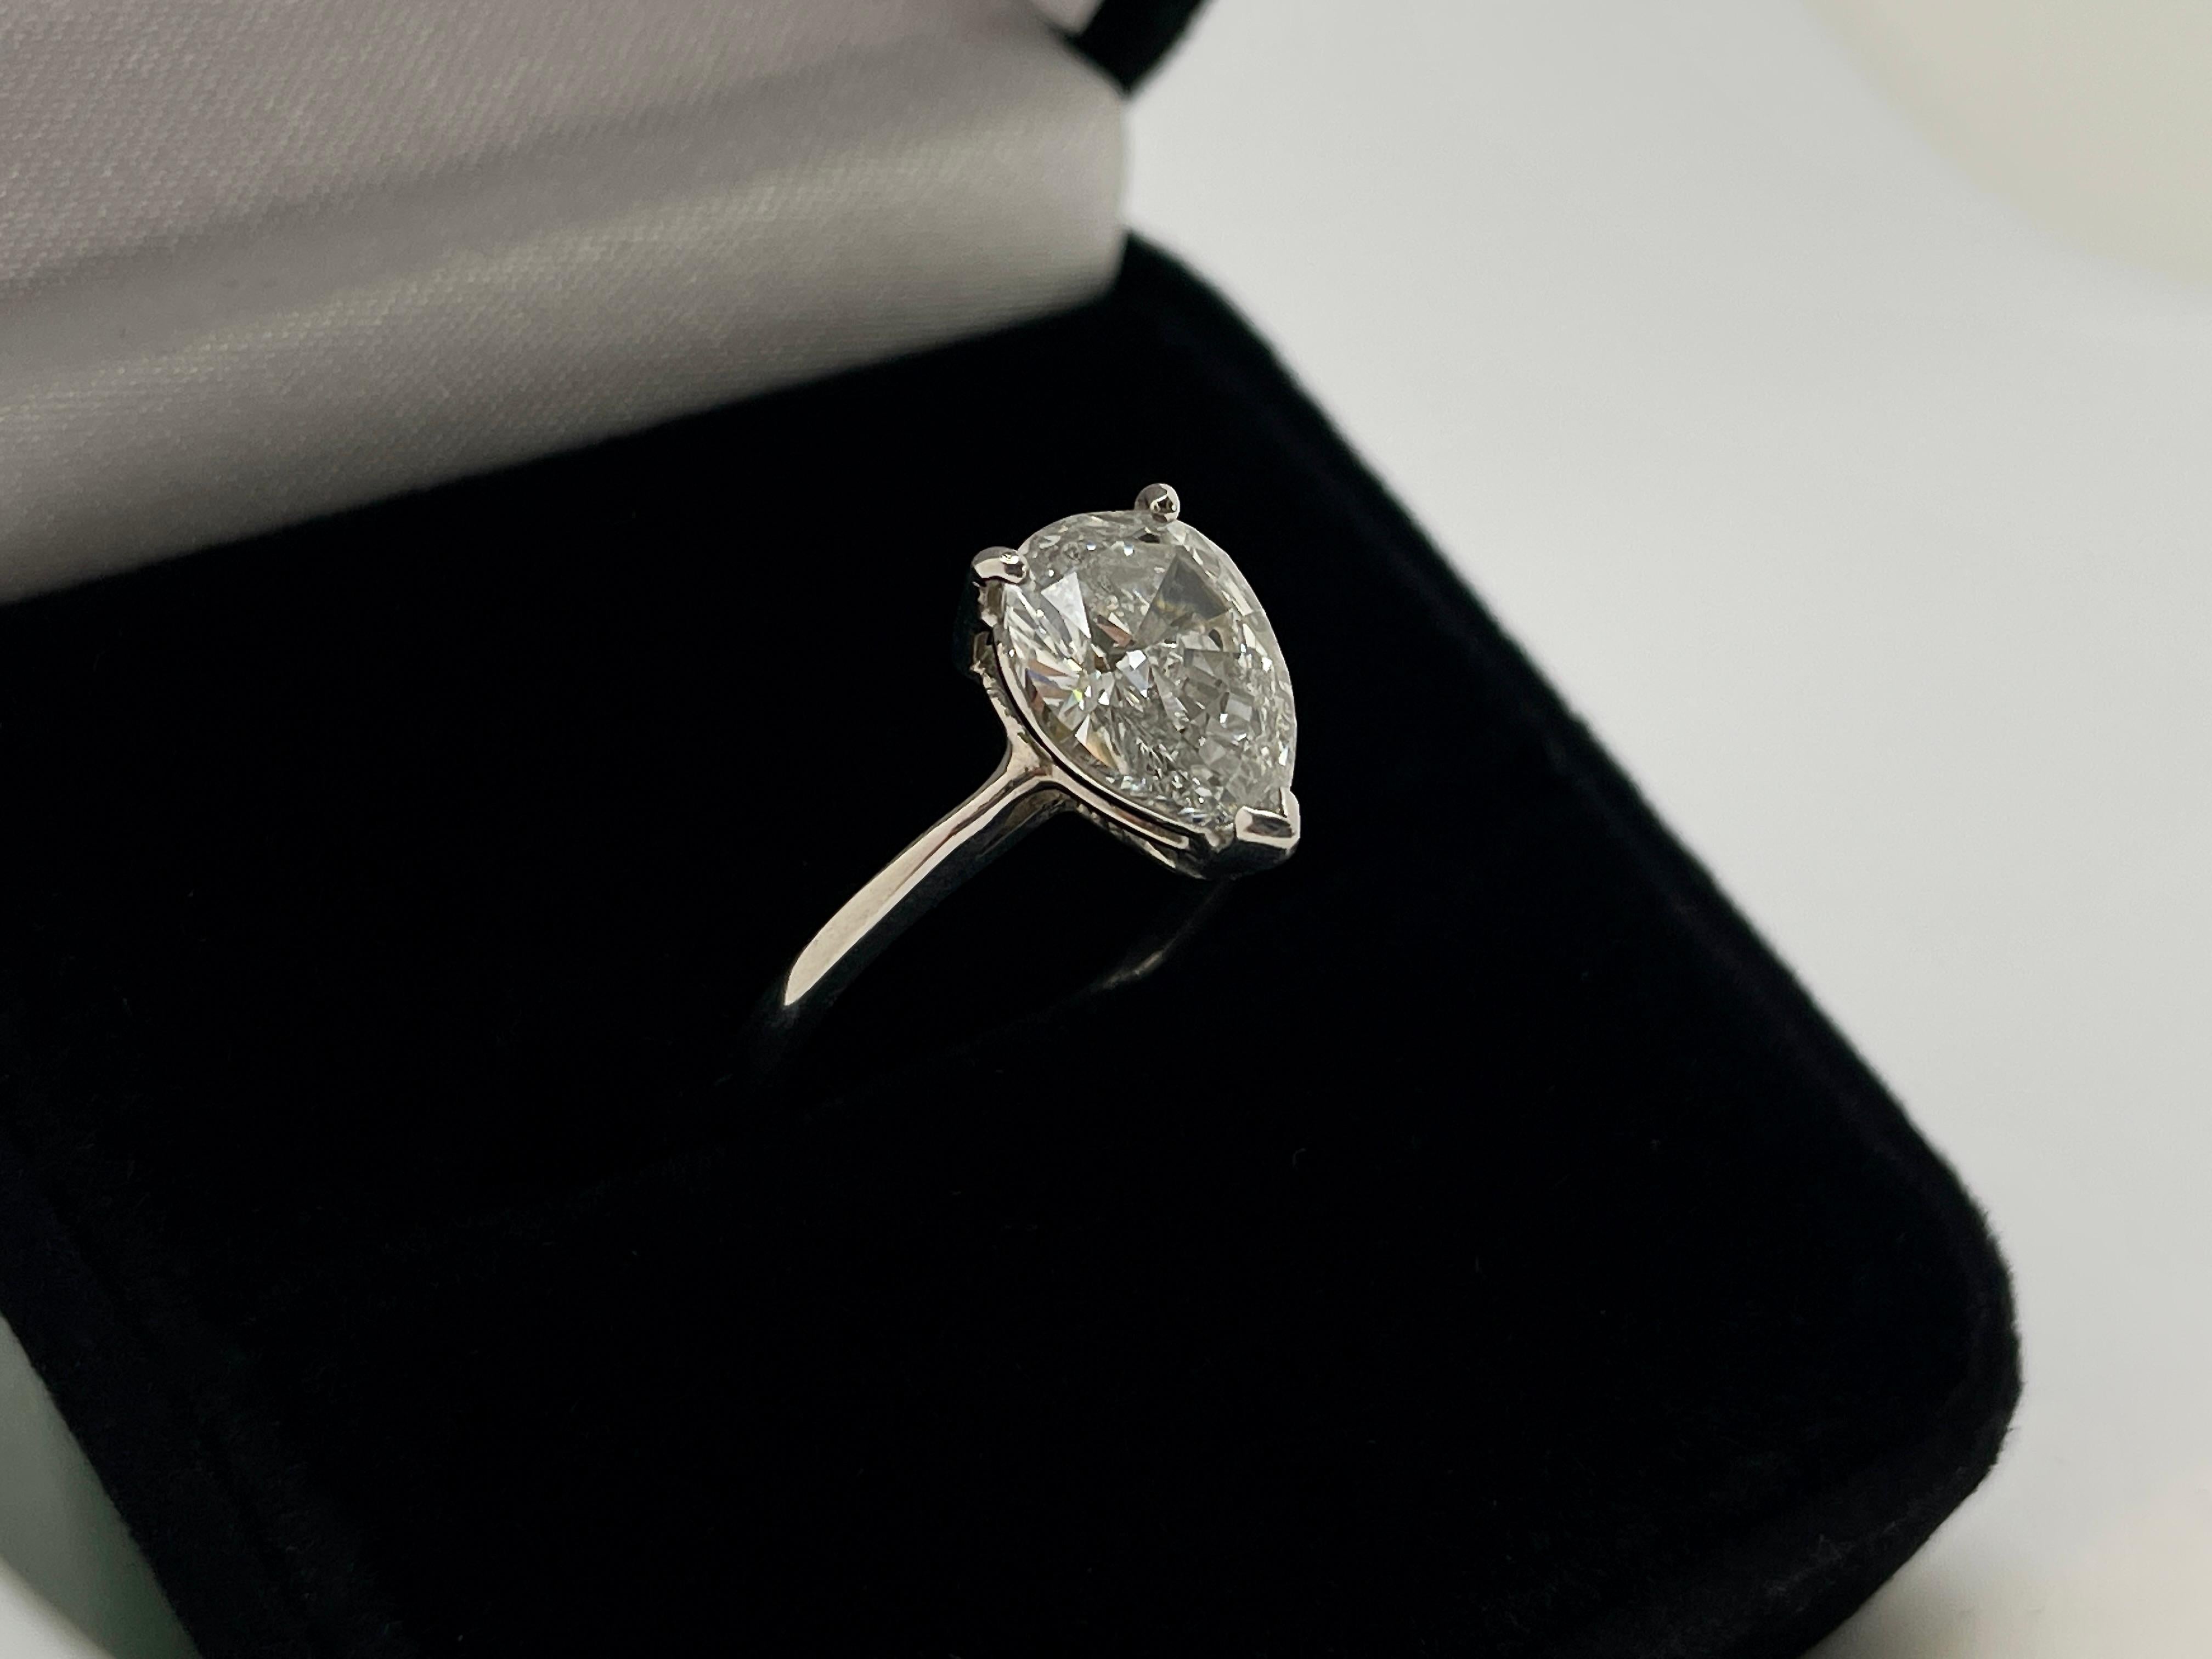 An original GIA certified 14K white gold diamond engagement ring. Mounted with a stunning 2.16 CT pear shaped natural E color SI2 clarity diamond, measuring 10.52 x 7.73 x 4.22 mm. Set on a 14K white gold setting.

Gross Weight: 2.65 Grams
Ring